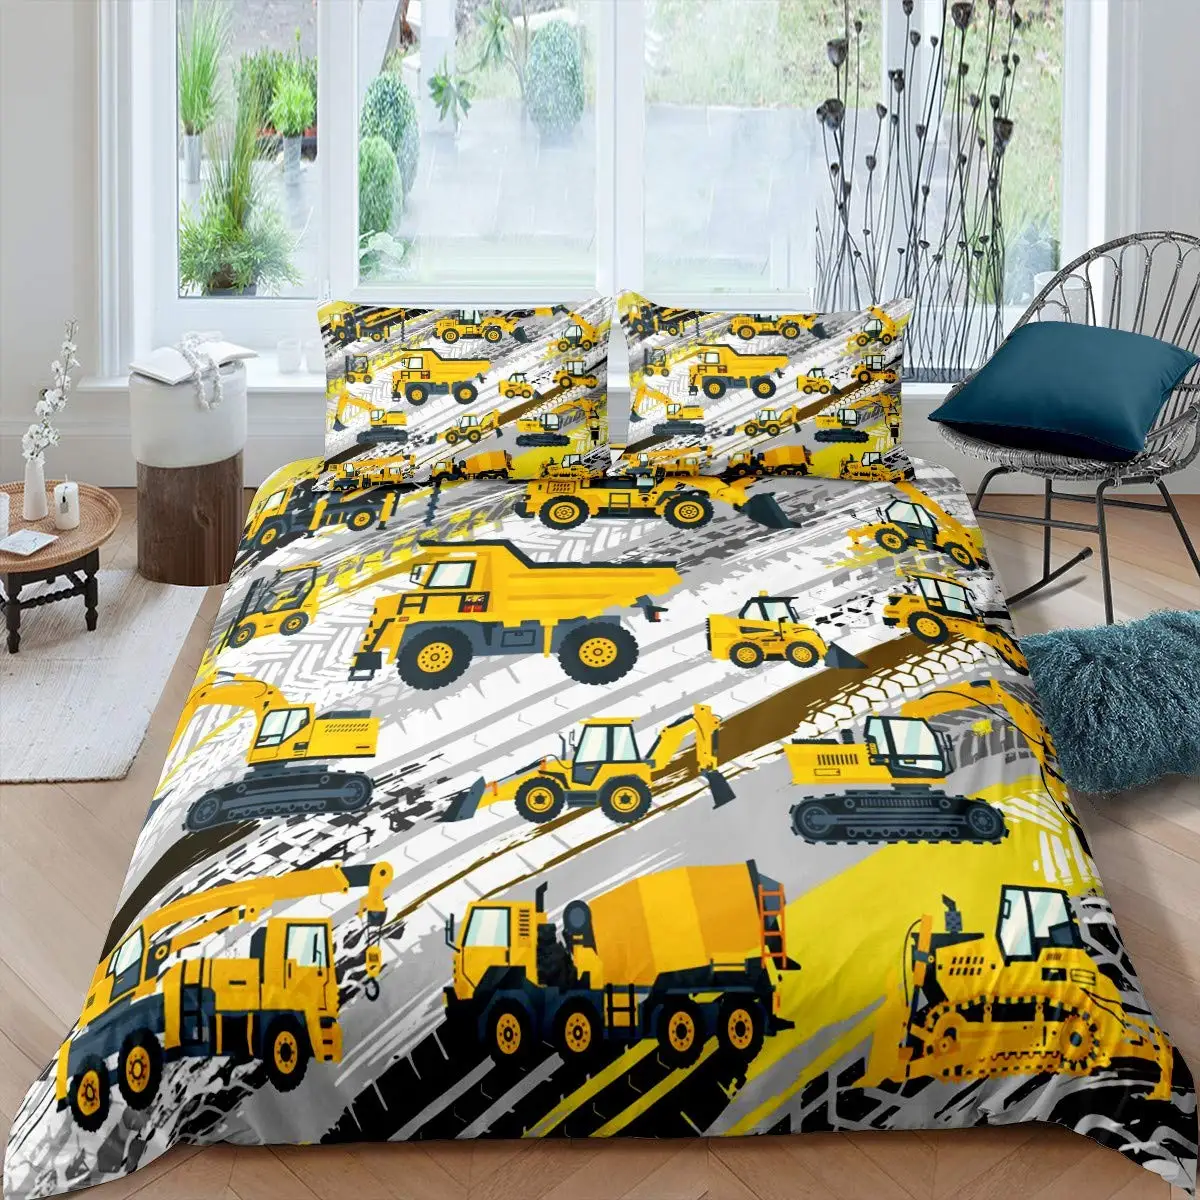 

Kid Excavator Duvet Cover Tractor Truck Bedding Set Construction Vehicle Cartoon Comforter Cover Crane Car Polyester Quilt Cover